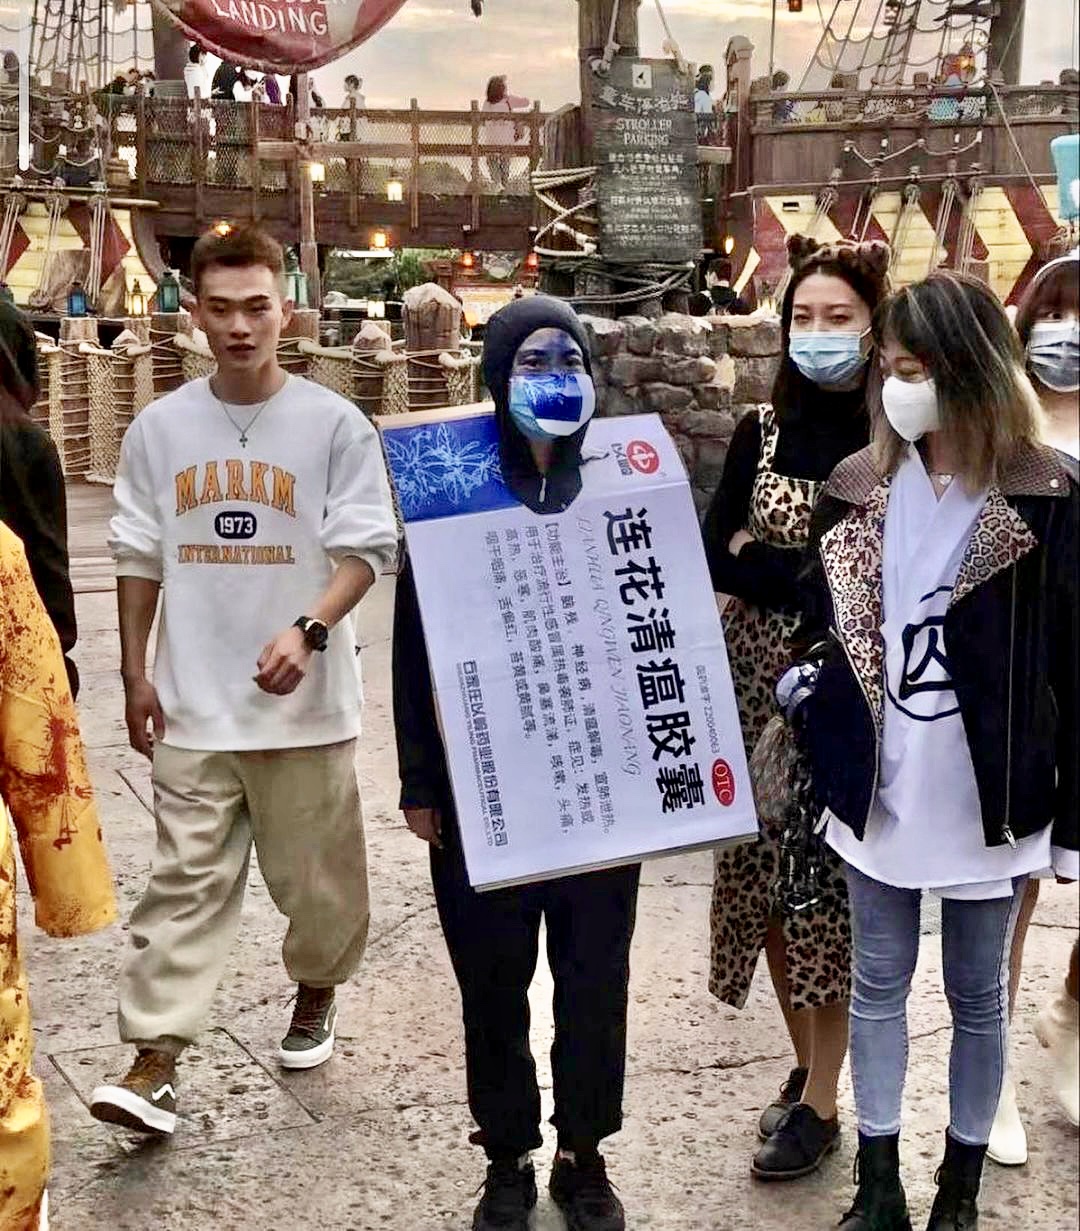 People In China Are Mocking Their Own Lives Under COVID Lockdown For Halloween And It’s So Funny